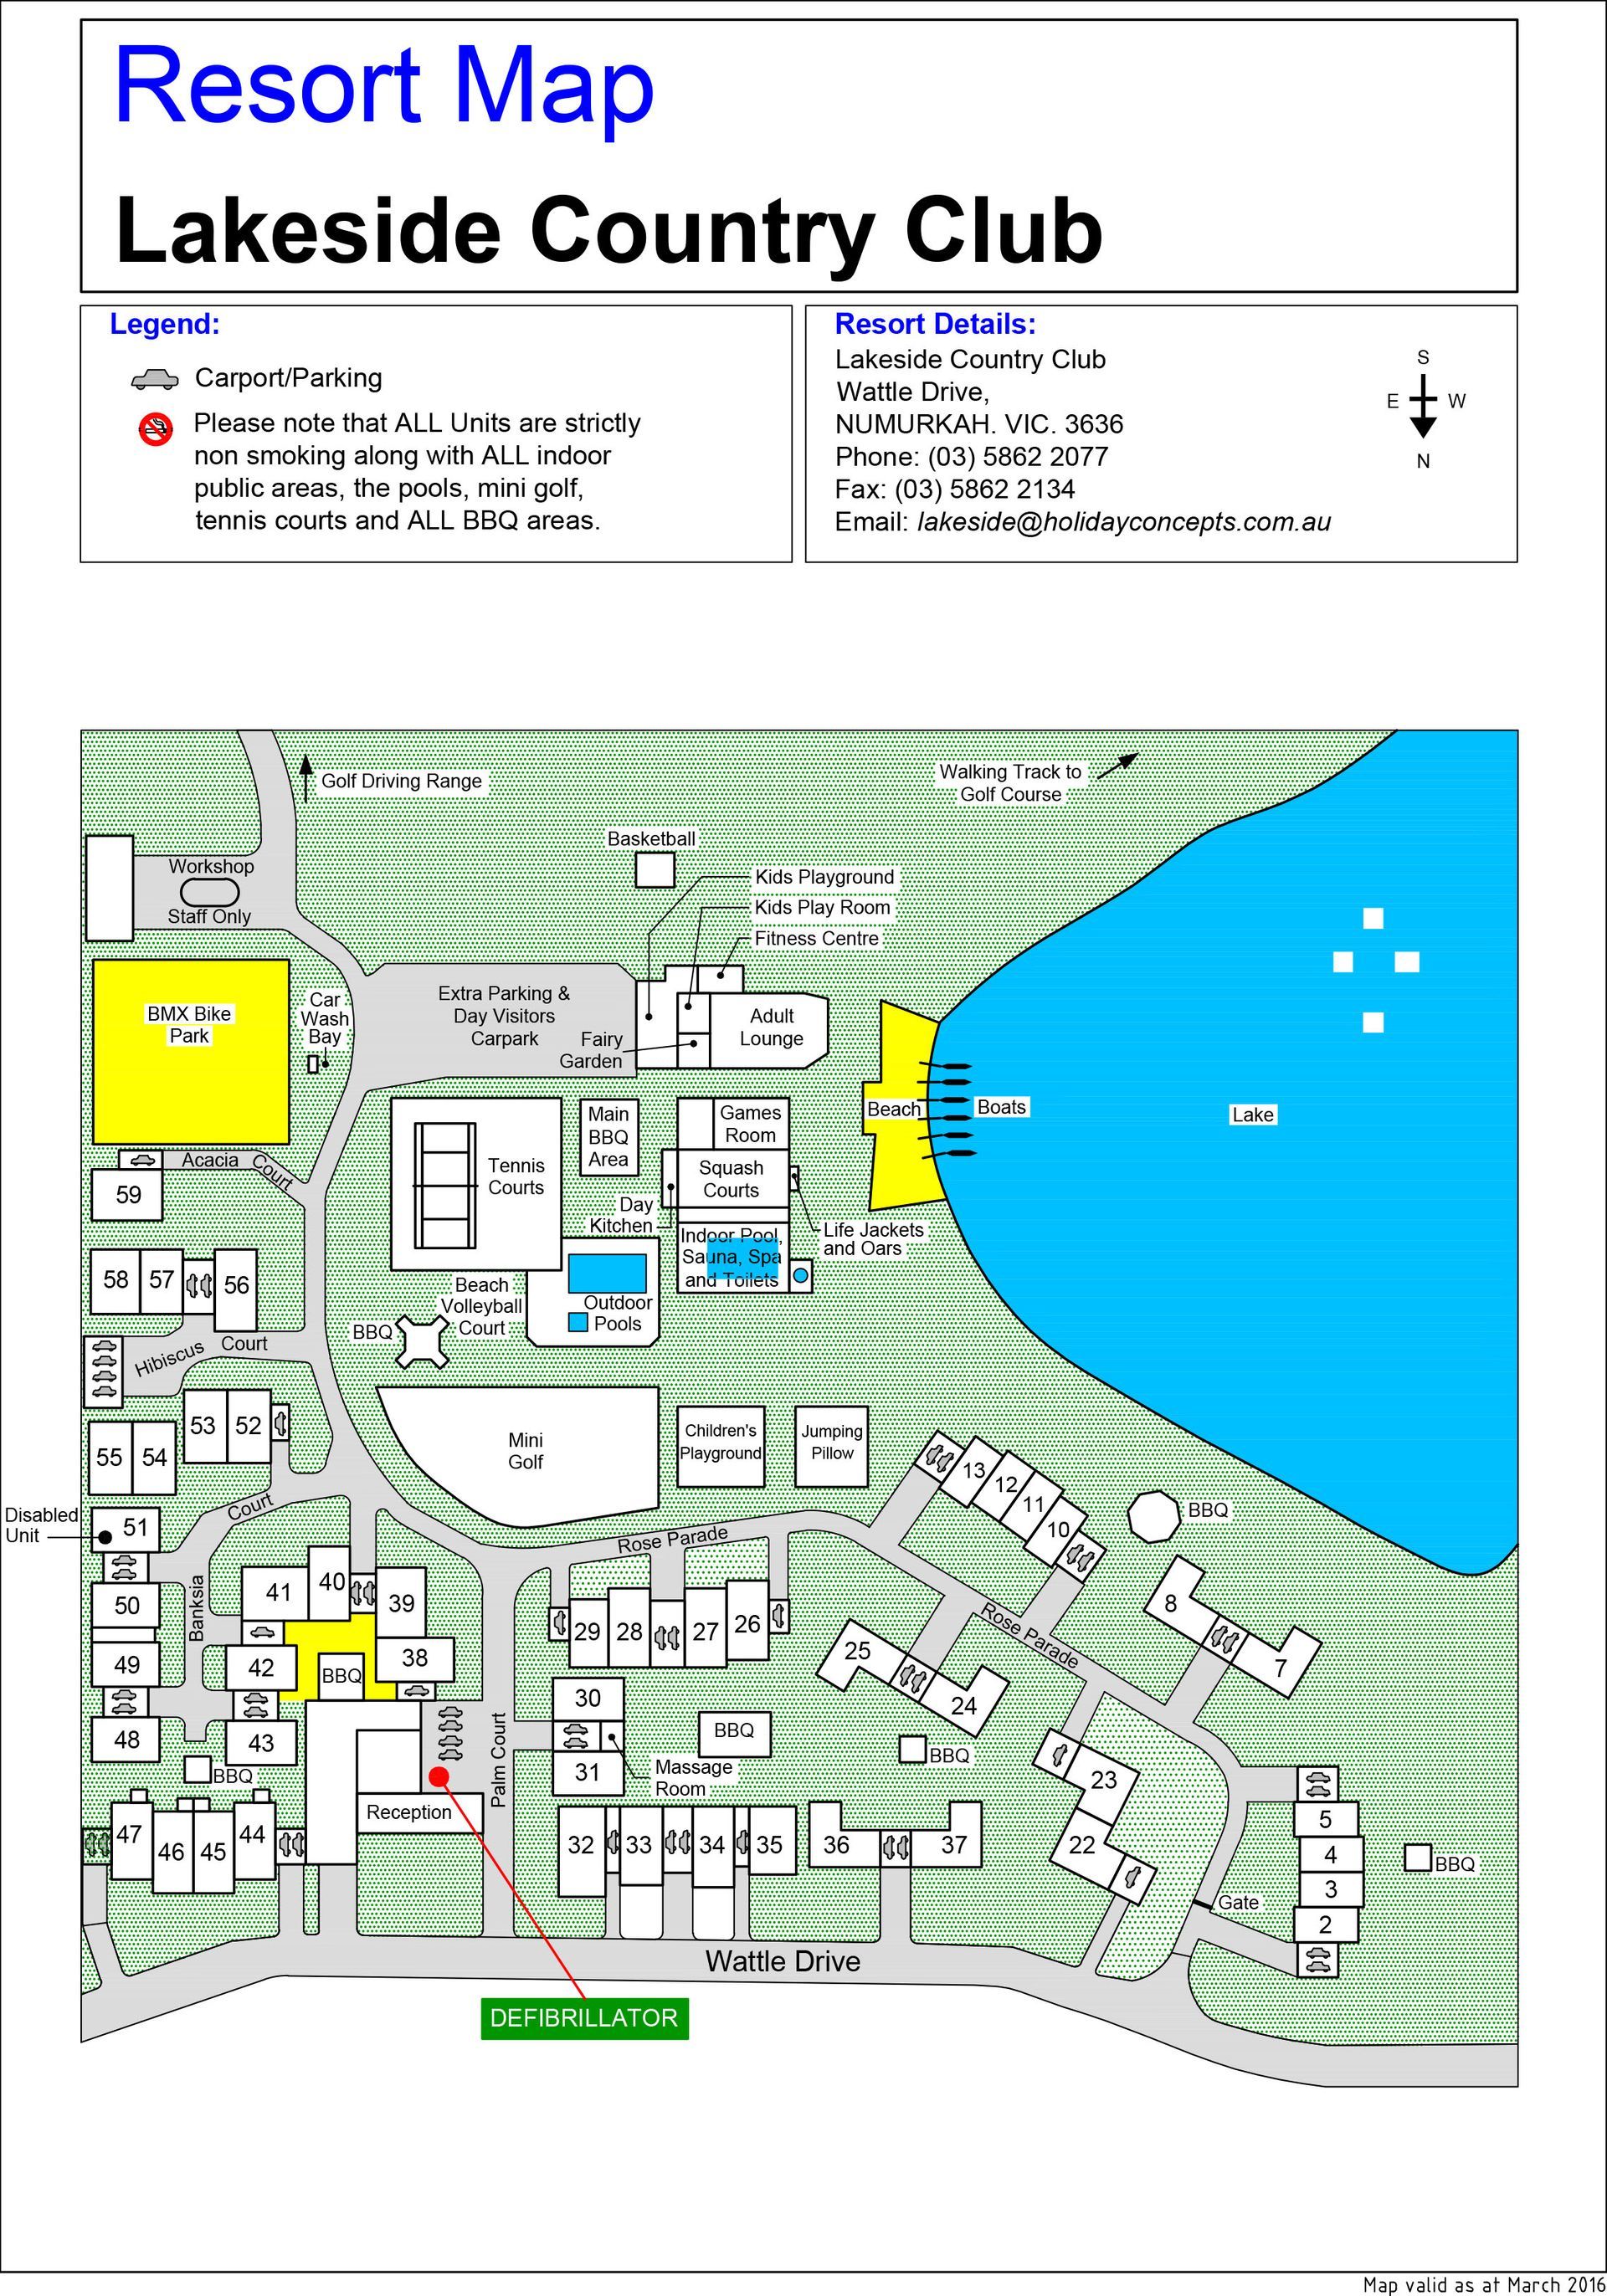 A resort map for the lakeside country club